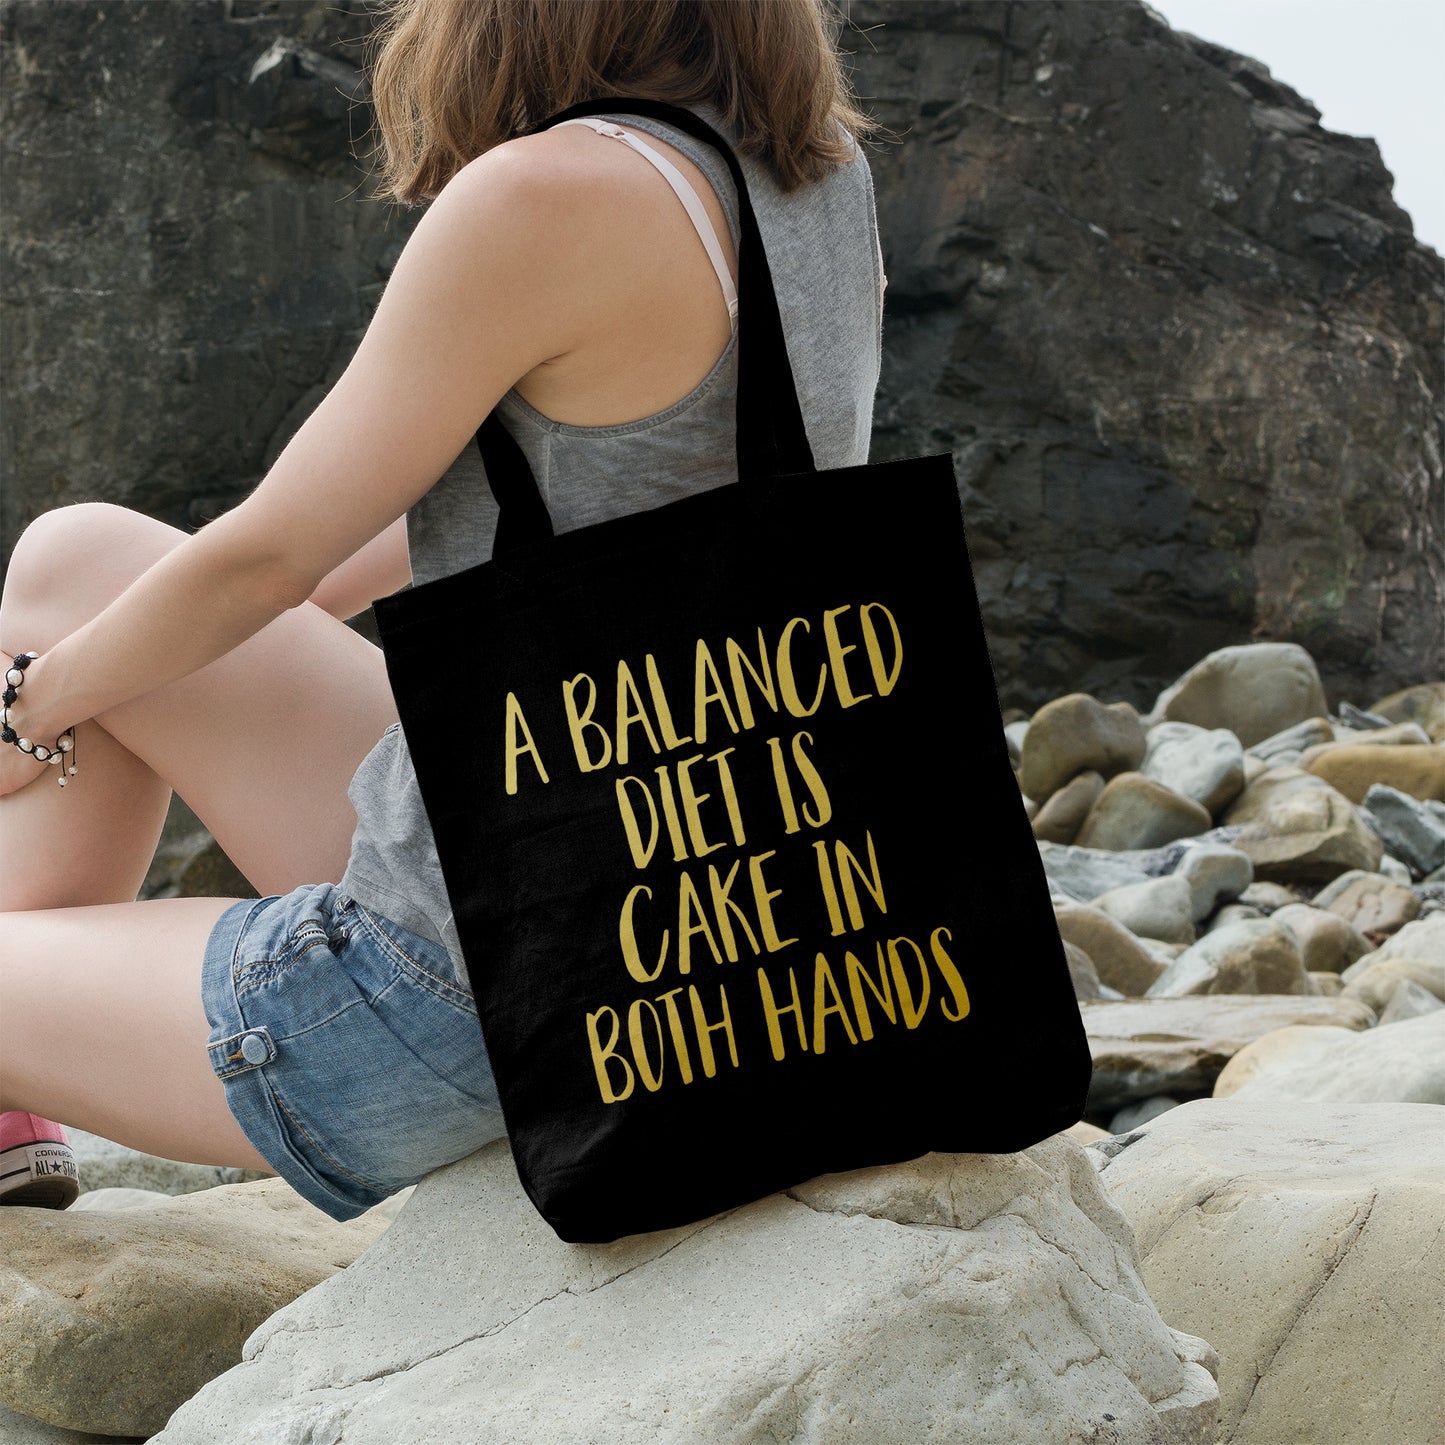 A balanced diet is cake in both hands | 100% Cotton tote bag